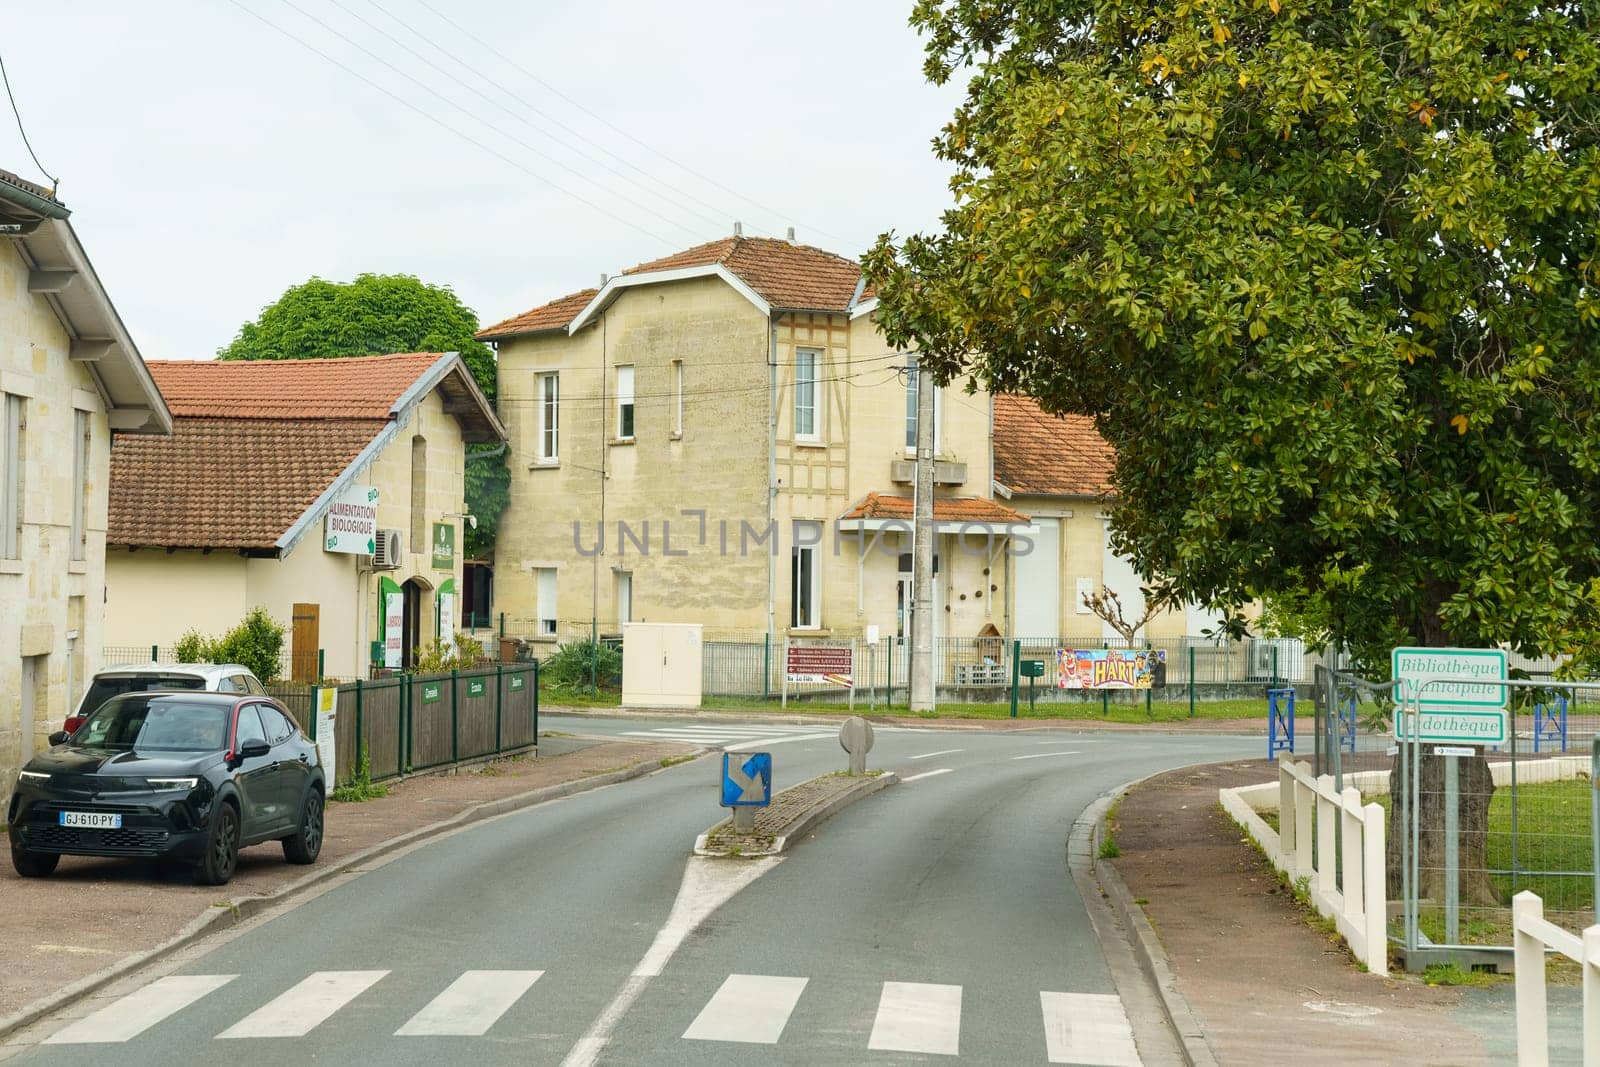 Ussel, France - April 27, 2023: A car is parked on the side of a road, surrounded by trees and grass. The vehicle shows no signs of movement or activity.